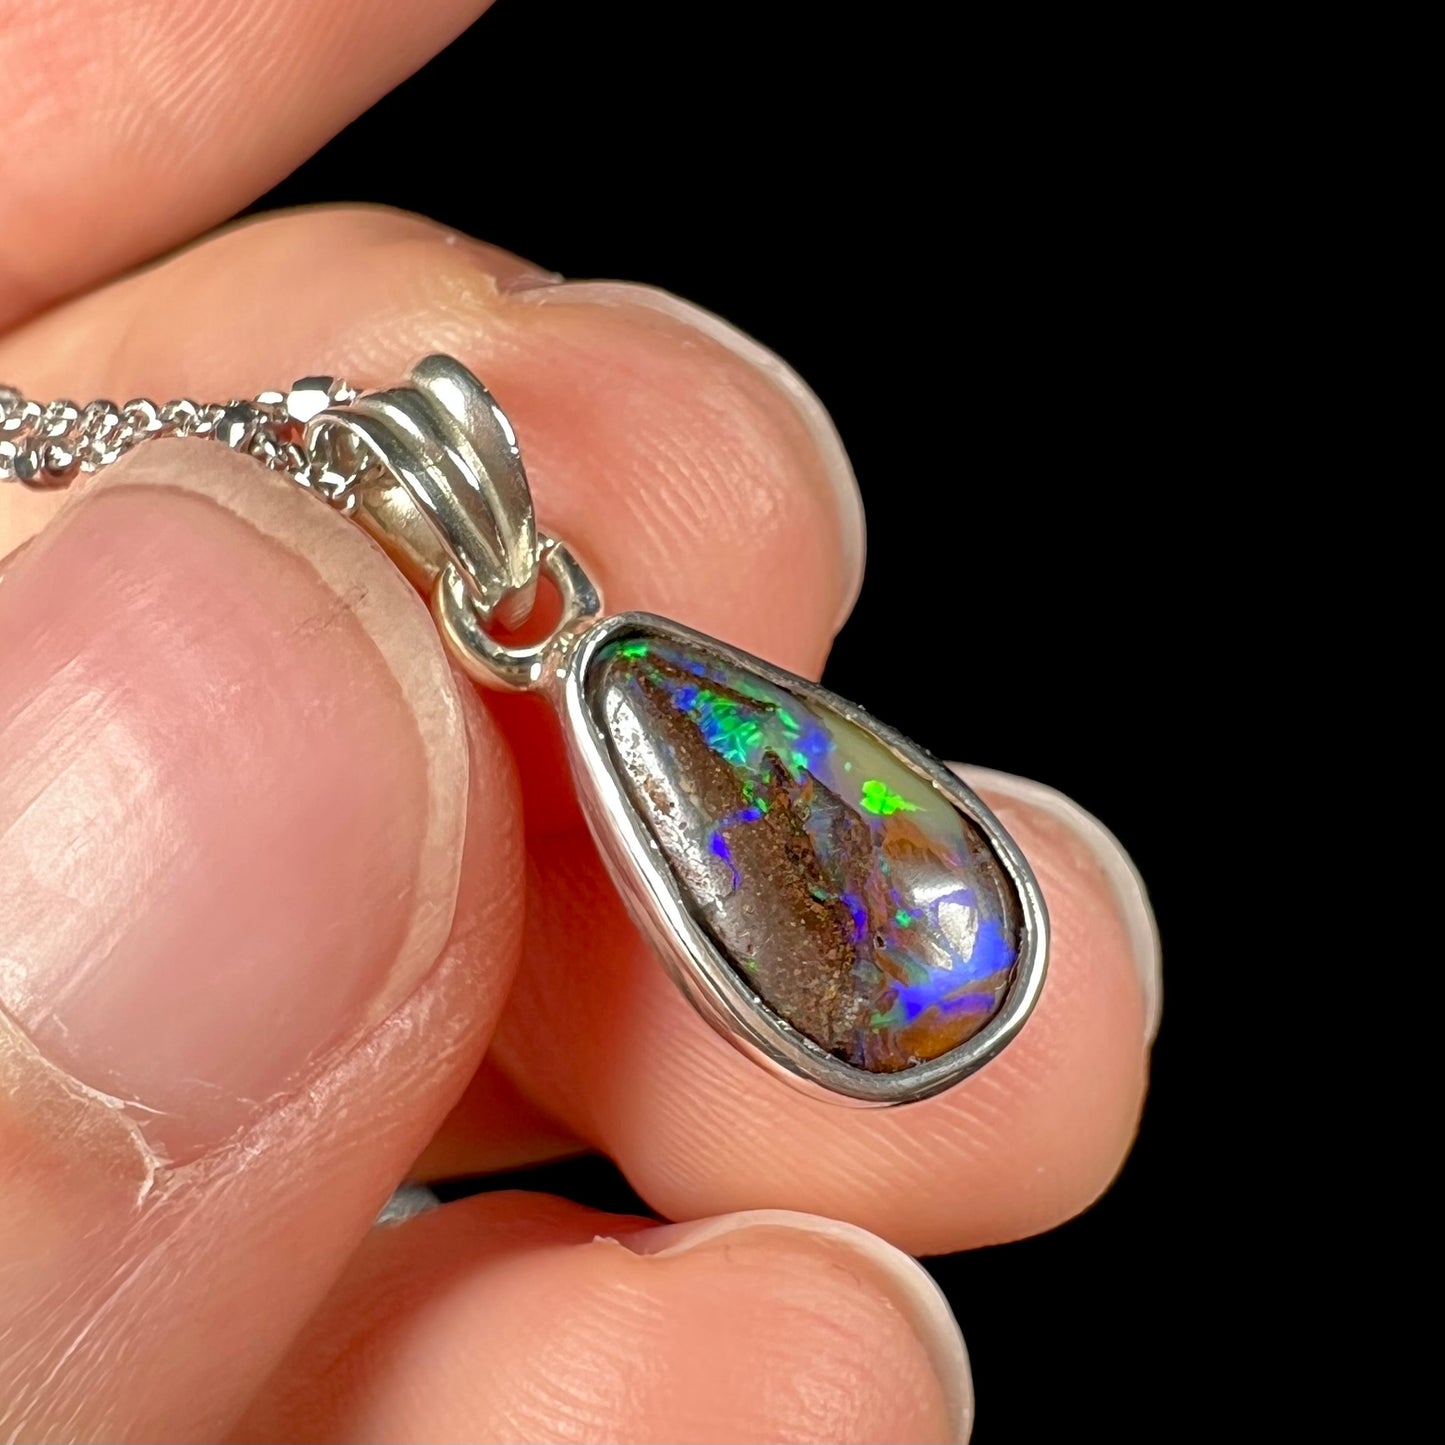 A natural, pear shaped Australian boulder opal with blue, purple, and green colors bezel set into a sterling silver necklace.